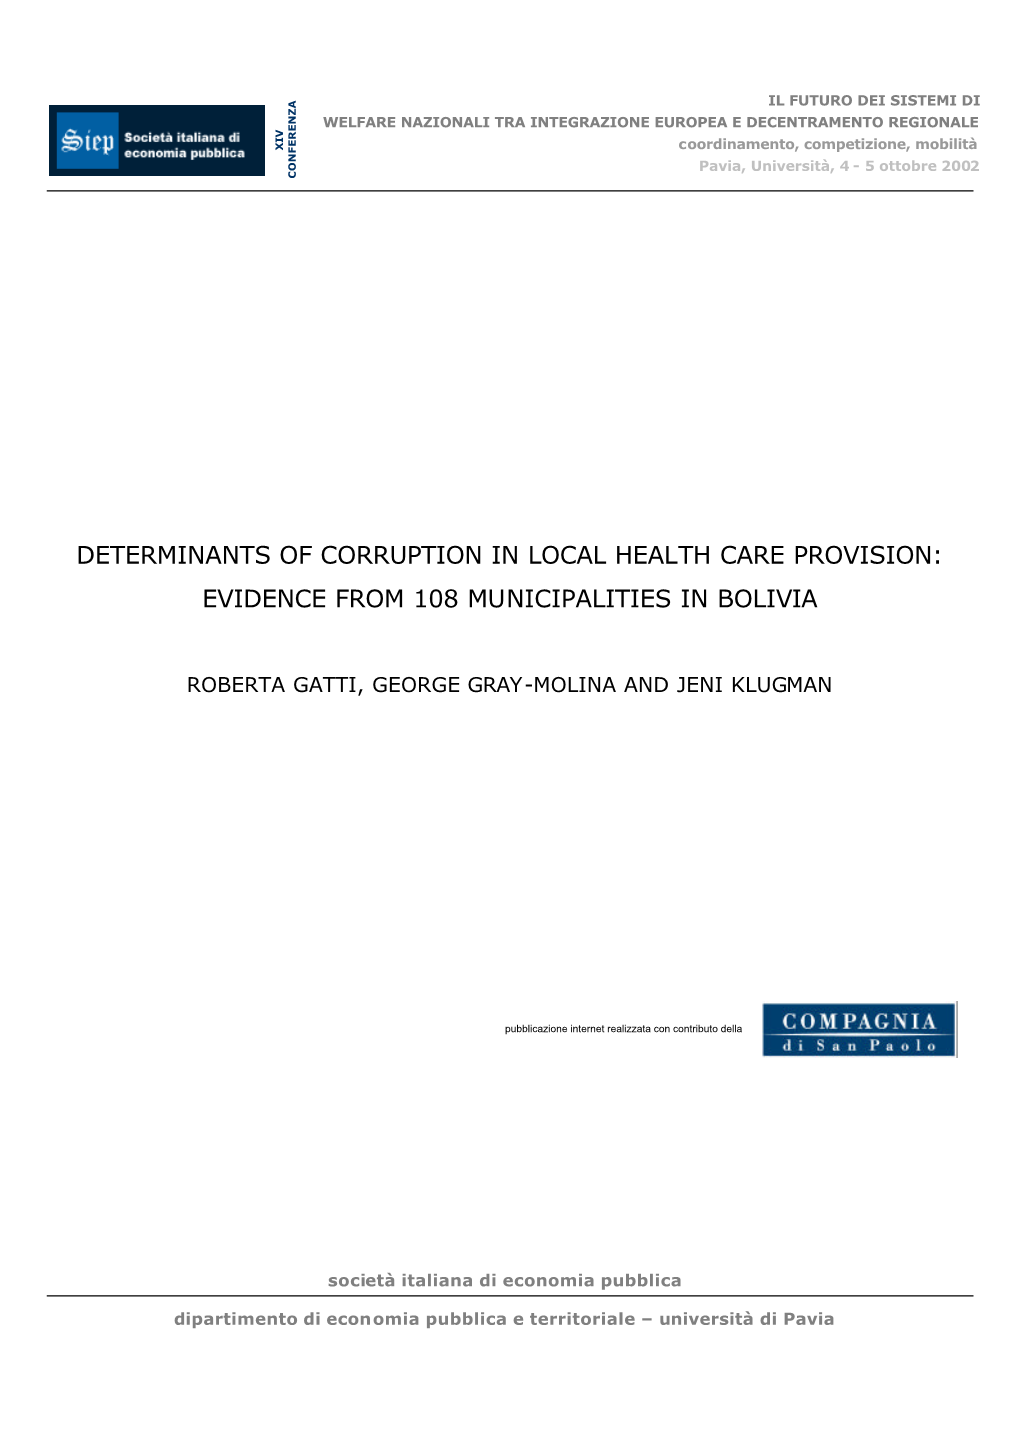 Determinants of Corruption in Local Health Care Provision: Evidence from 108 Municipalities in Bolivia